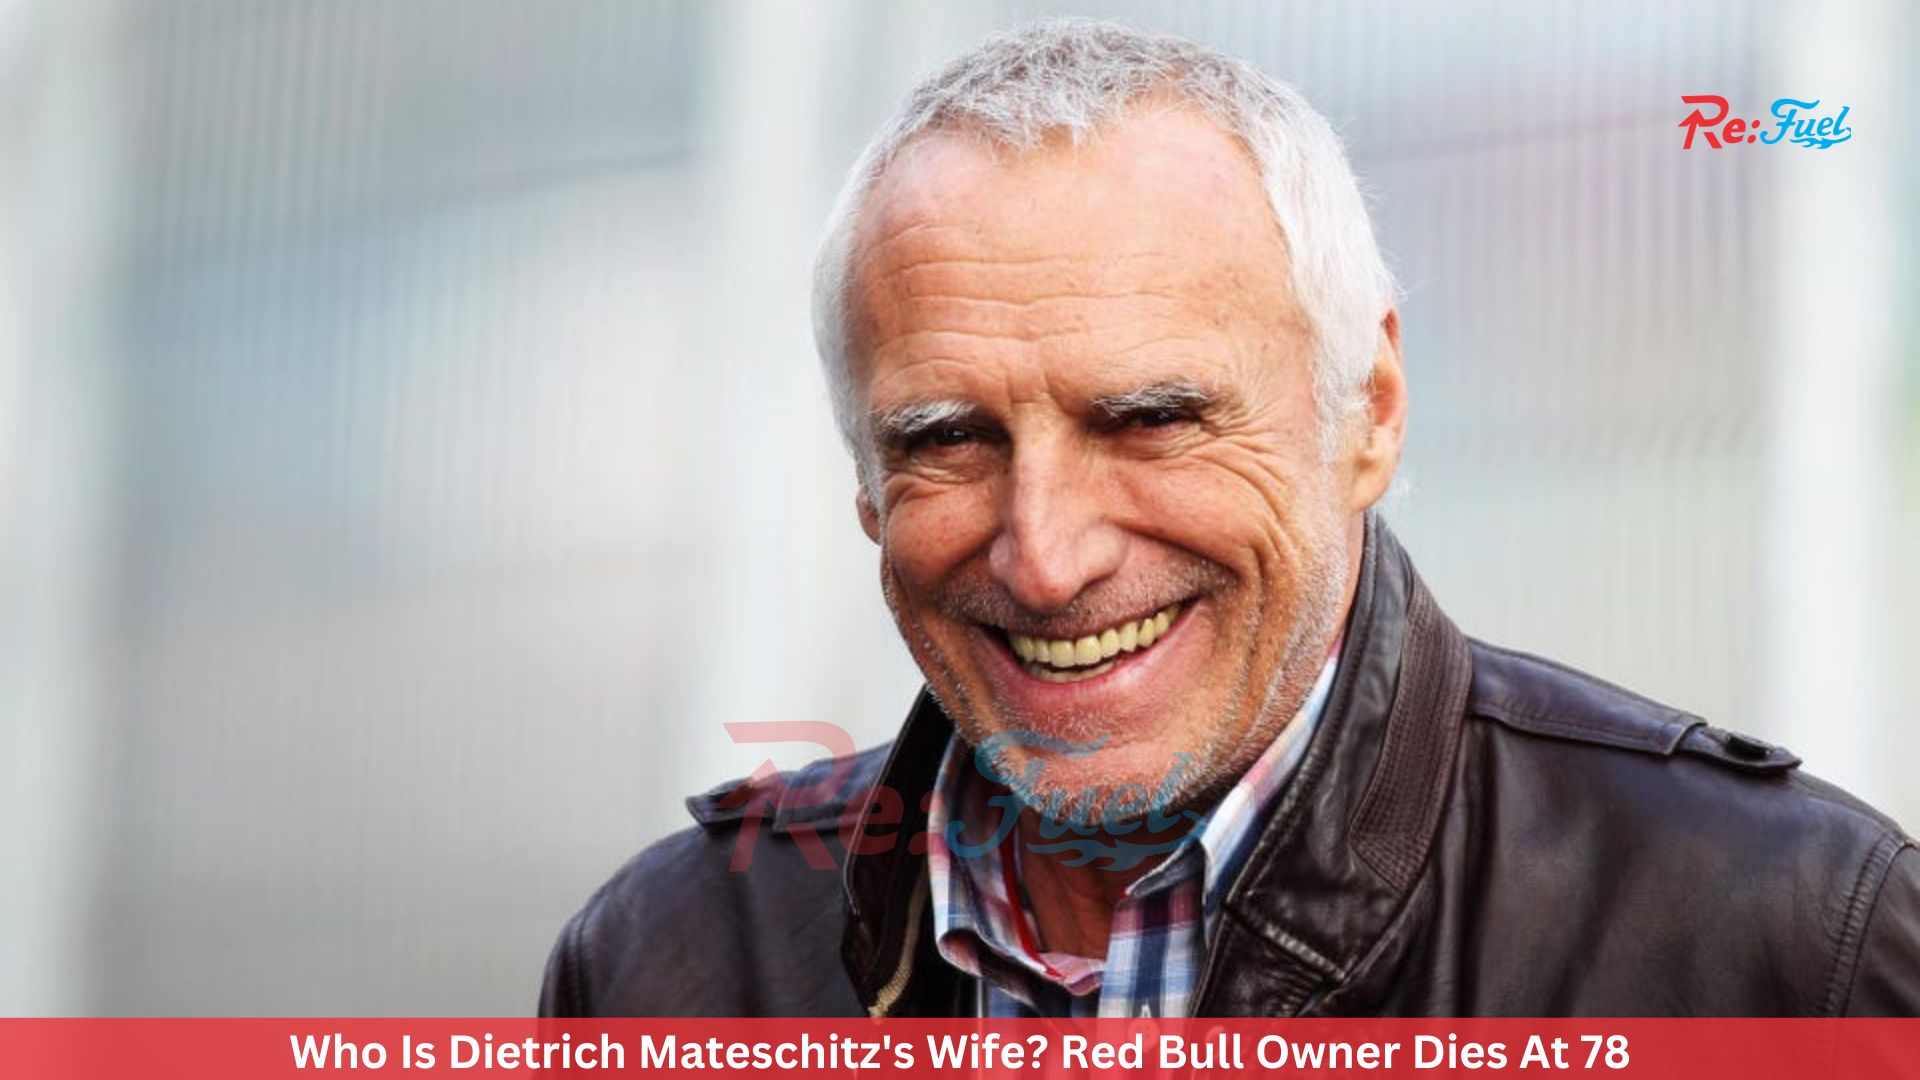 Who Is Dietrich Mateschitz's Wife? Red Bull Owner Dies At 78